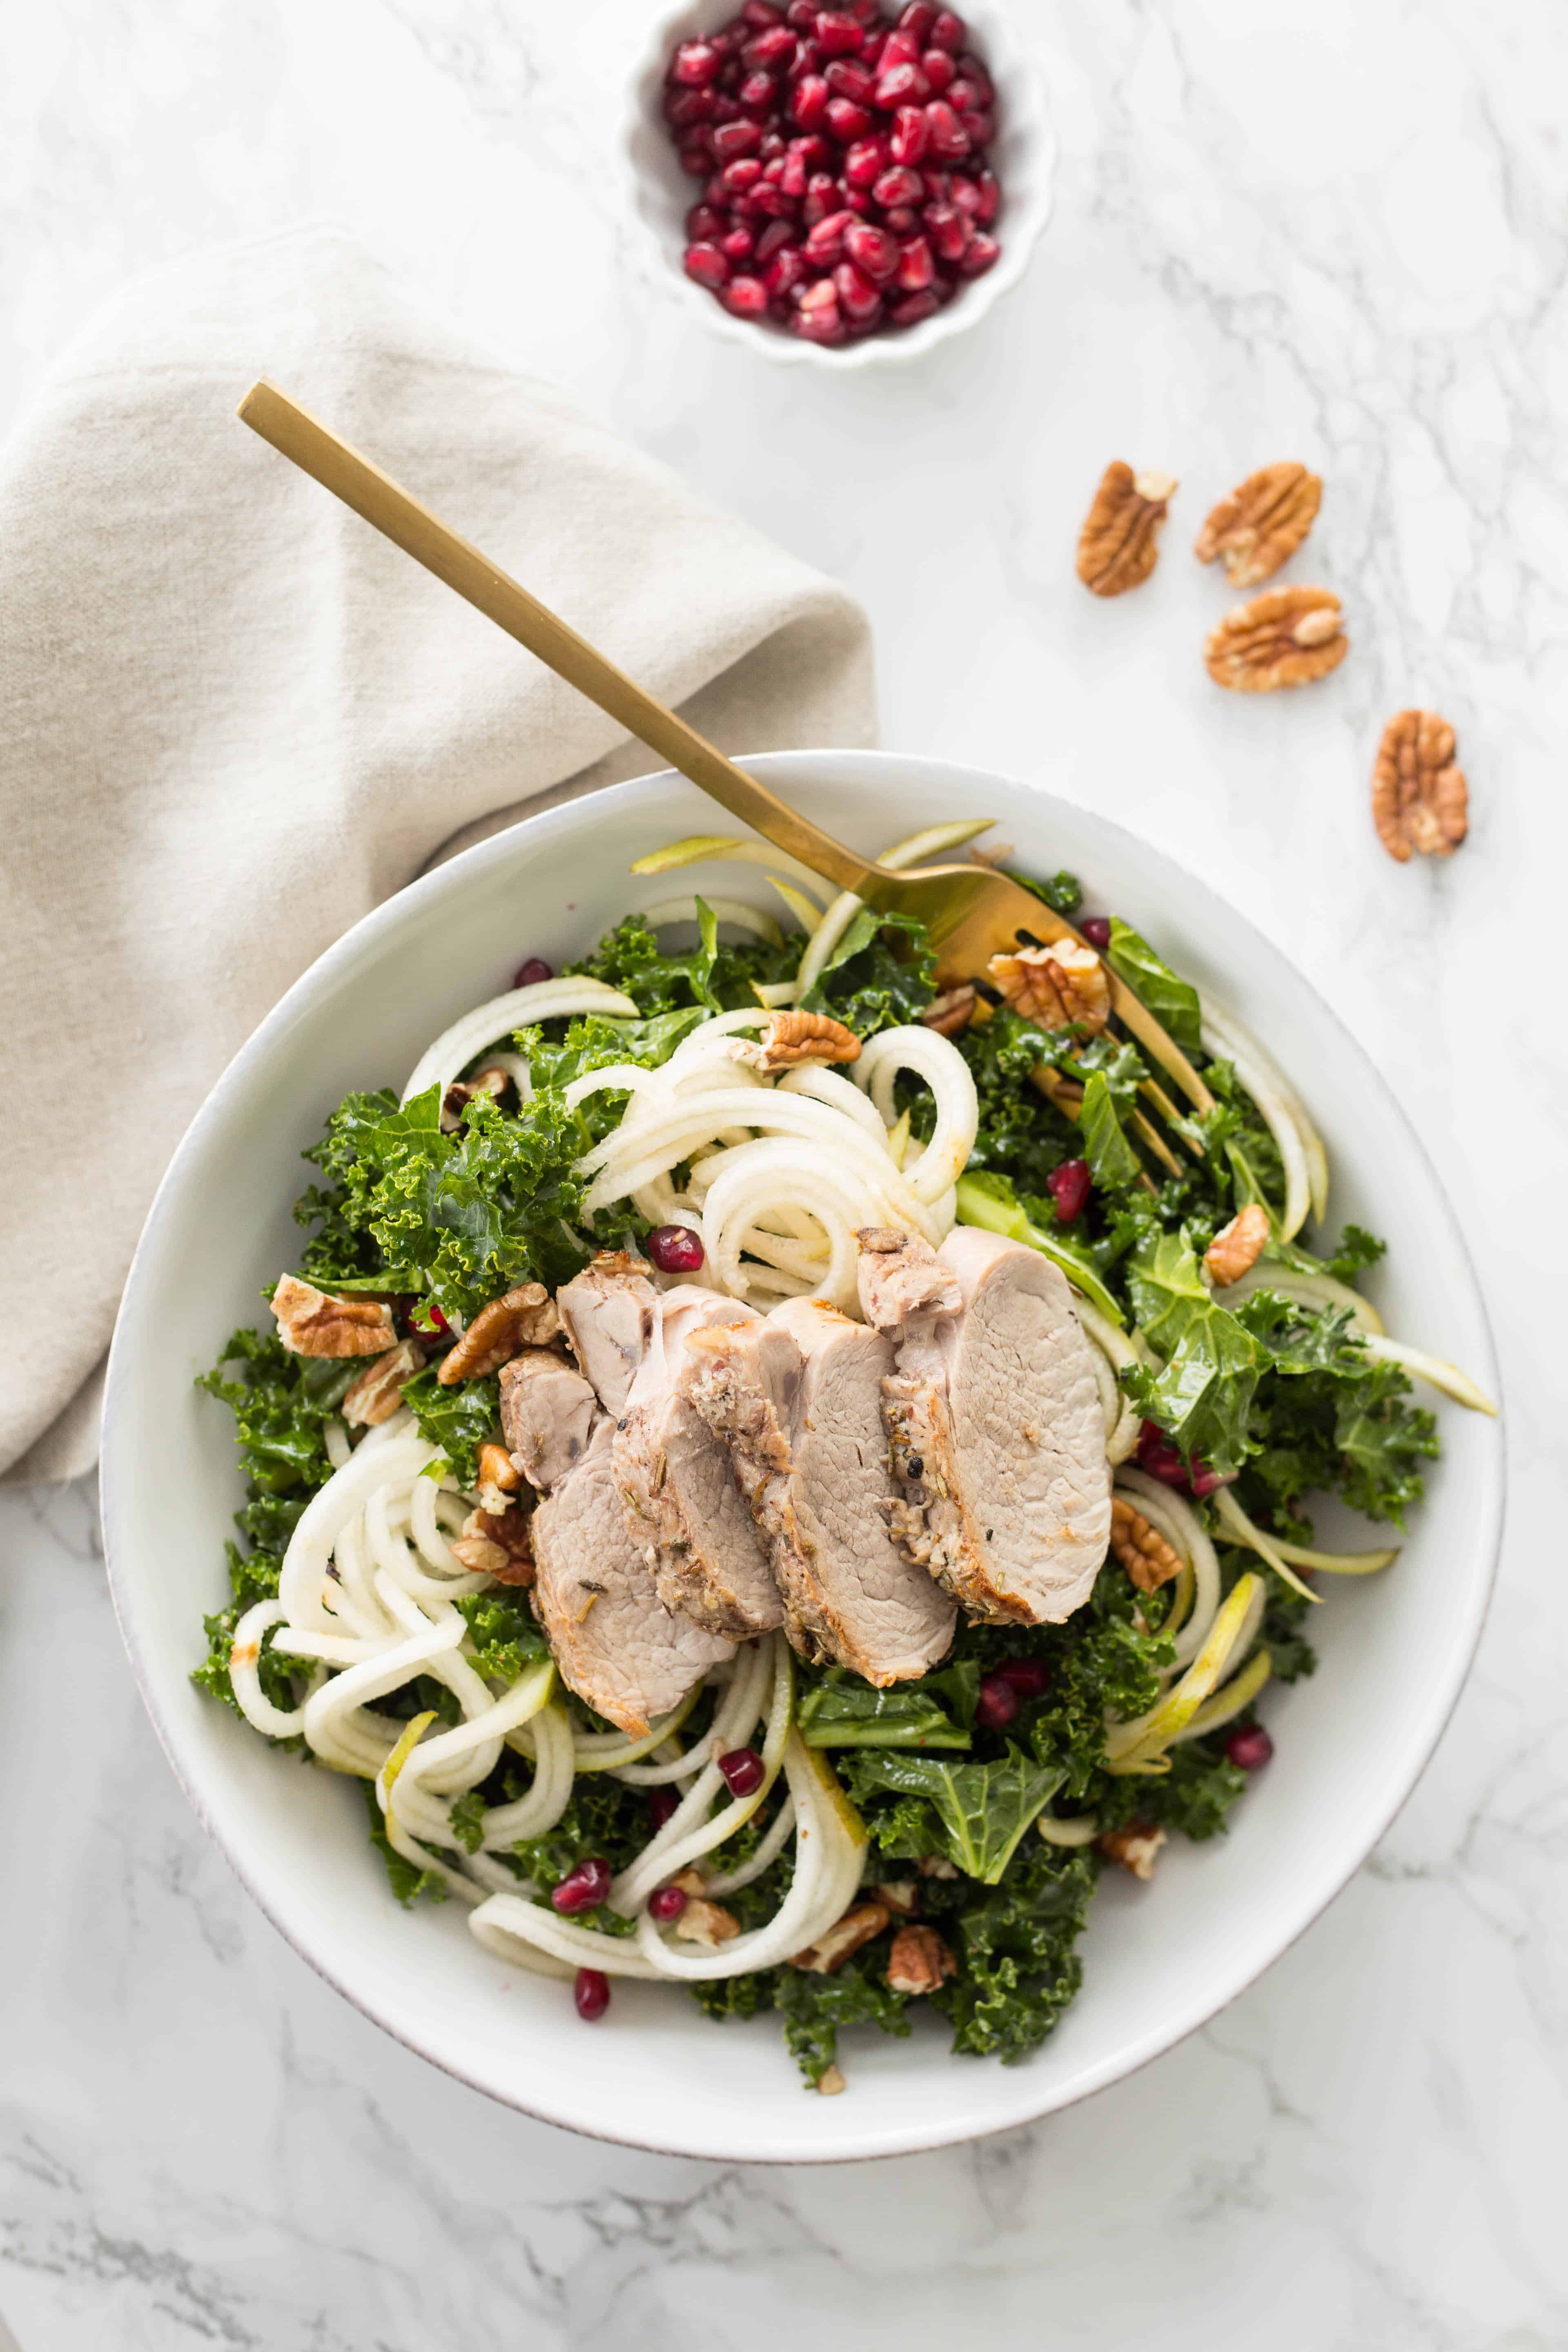 Pear Noodle, Pomegranate and Kale Salad with Roasted Pork Tenderloin